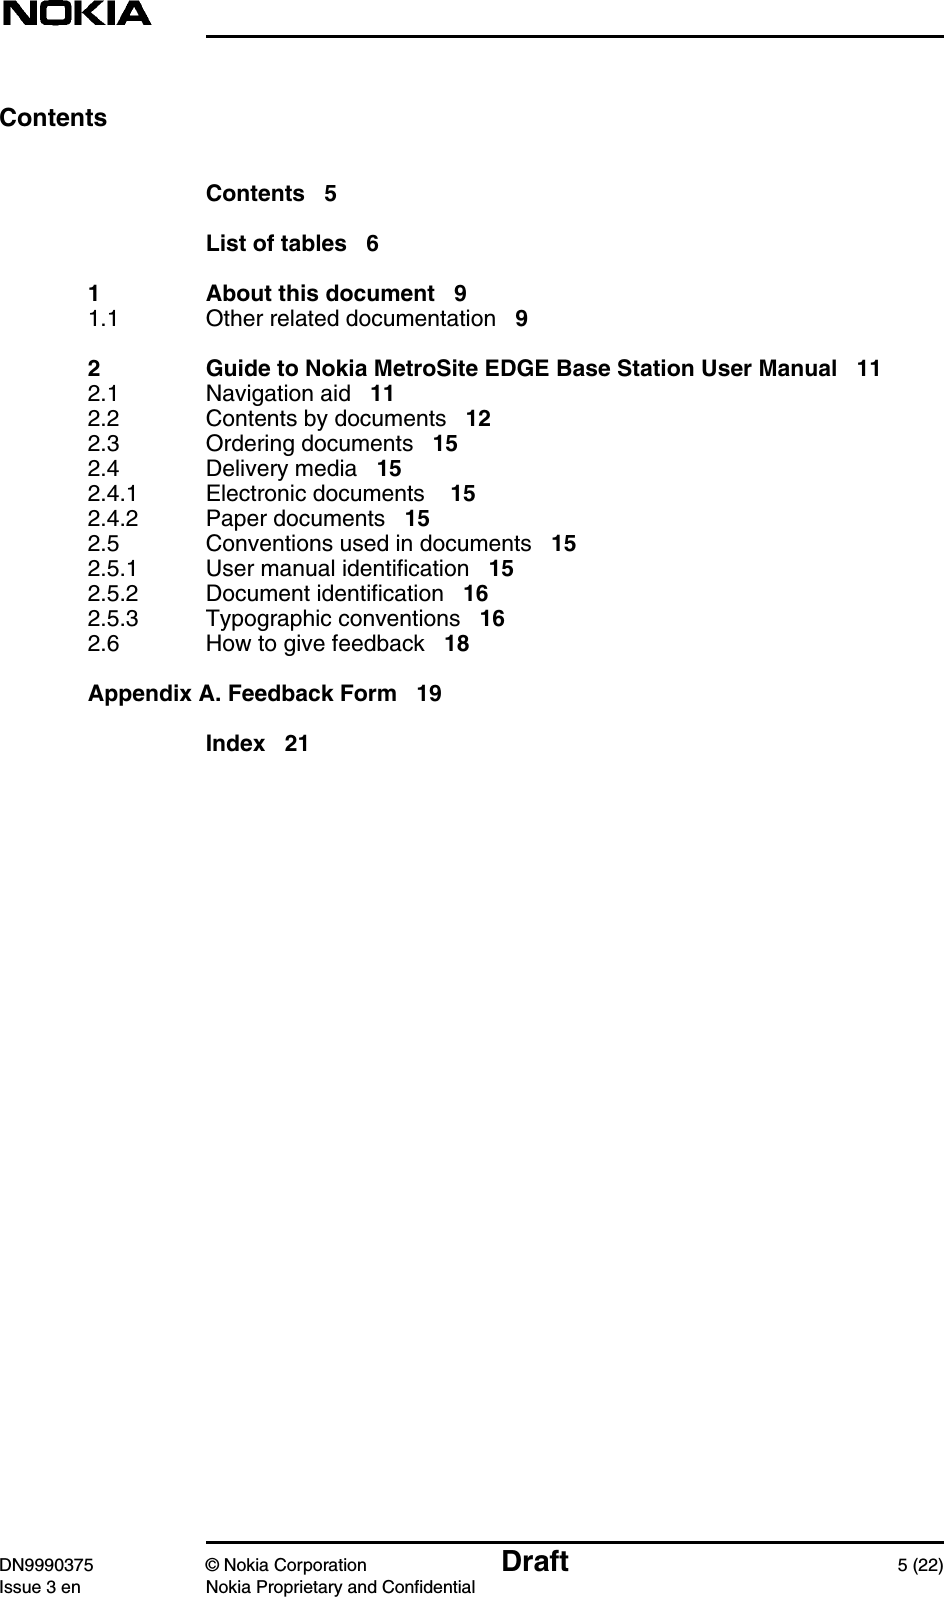 DN9990375 © Nokia Corporation Draft 5 (22)Issue 3 en Nokia Proprietary and ConfidentialContentsContents 5List of tables 61 About this document 91.1 Other related documentation 92 Guide to Nokia MetroSite EDGE Base Station User Manual 112.1 Navigation aid 112.2 Contents by documents 122.3 Ordering documents 152.4 Delivery media 152.4.1 Electronic documents 152.4.2 Paper documents 152.5 Conventions used in documents 152.5.1 User manual identification 152.5.2 Document identification 162.5.3 Typographic conventions 162.6 How to give feedback 18Appendix A. Feedback Form 19Index 21